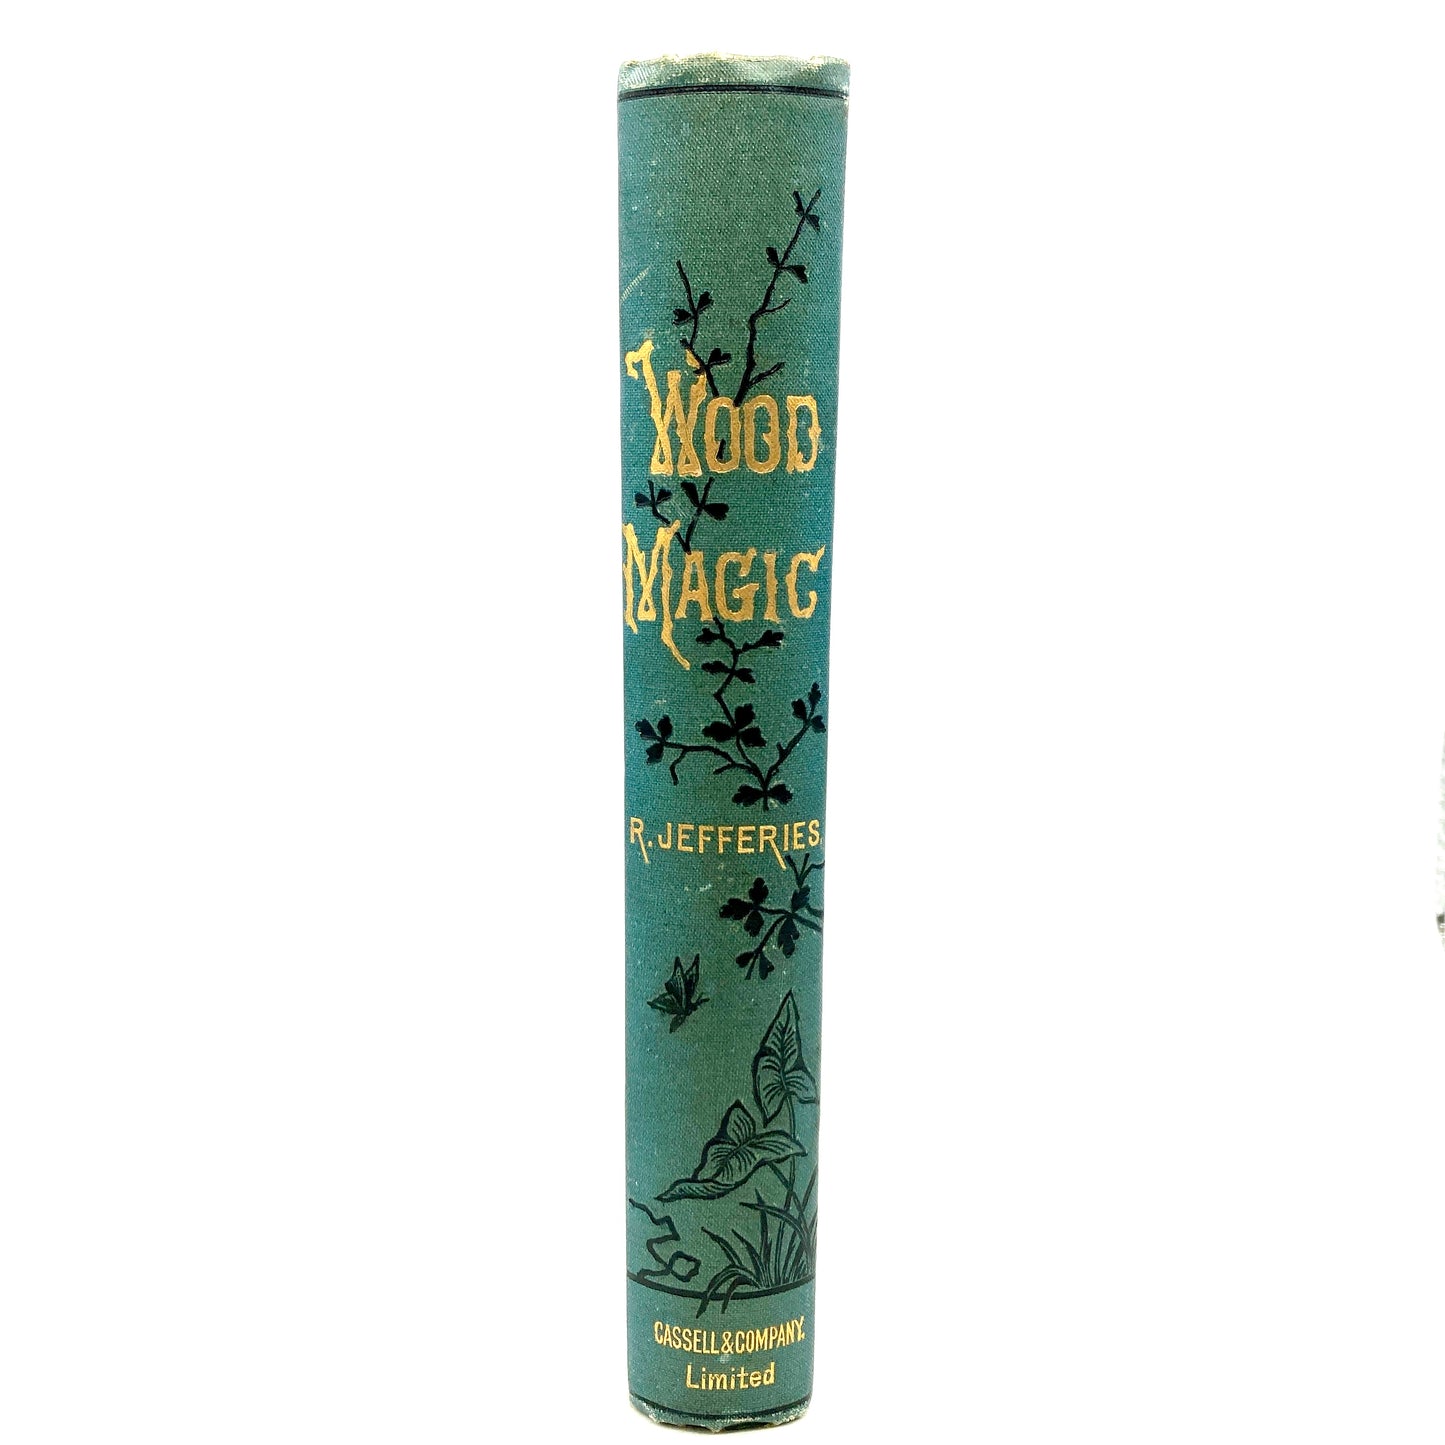 JEFFERIES, Richard "Wood Magic, A Fable" [Cassell, Petter, Galpin & Co, n.d./c1878]